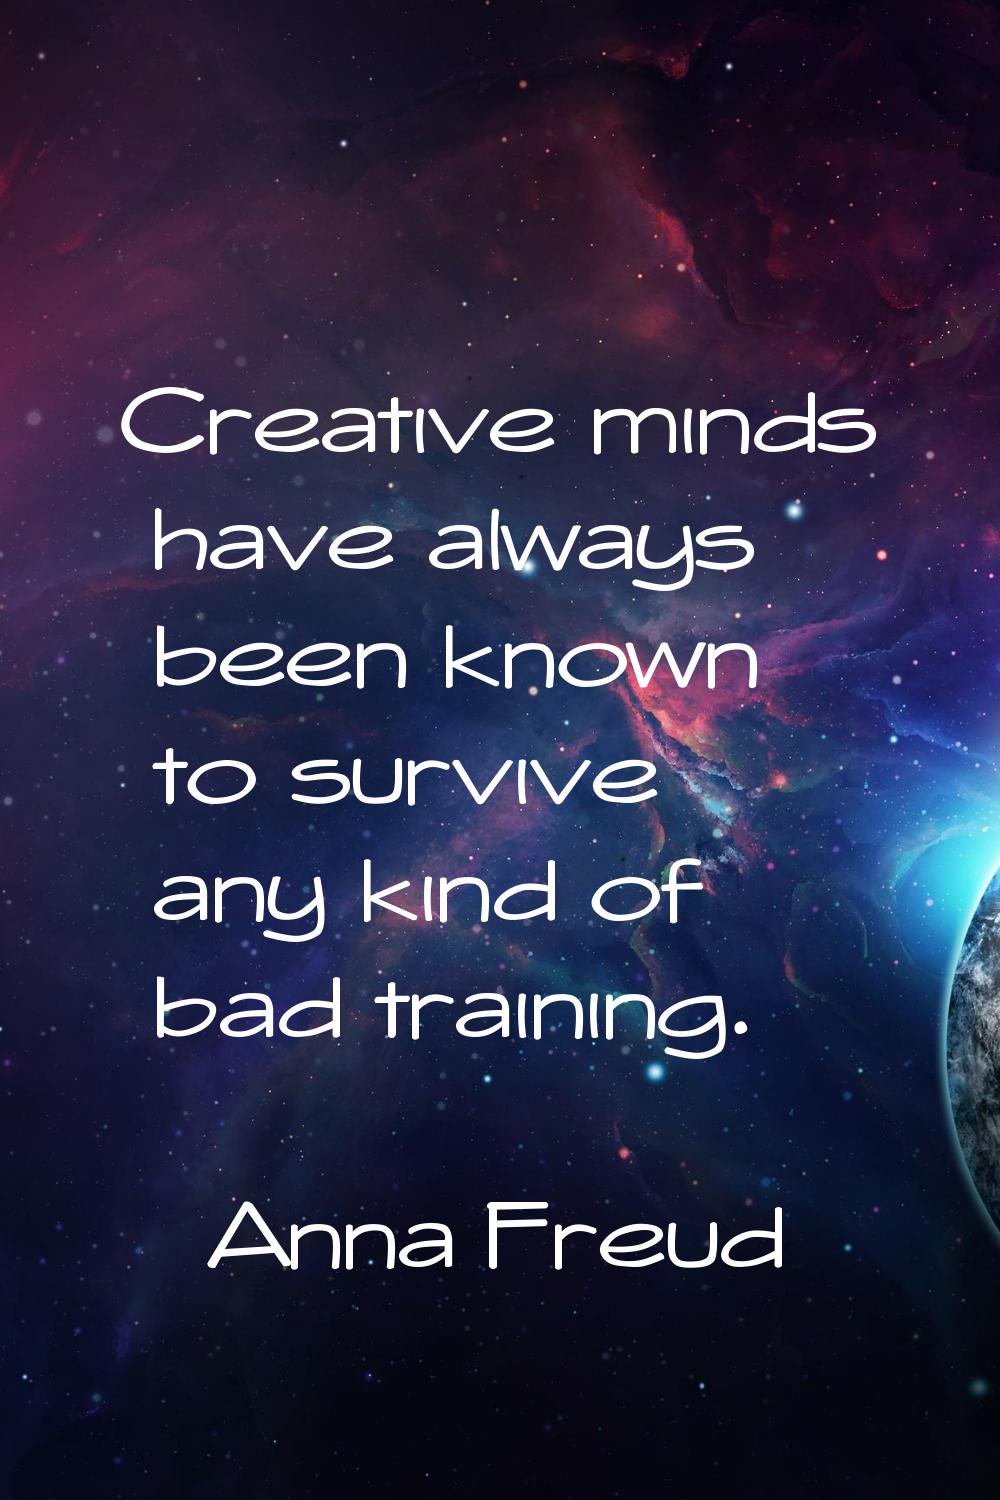 Creative minds have always been known to survive any kind of bad training.